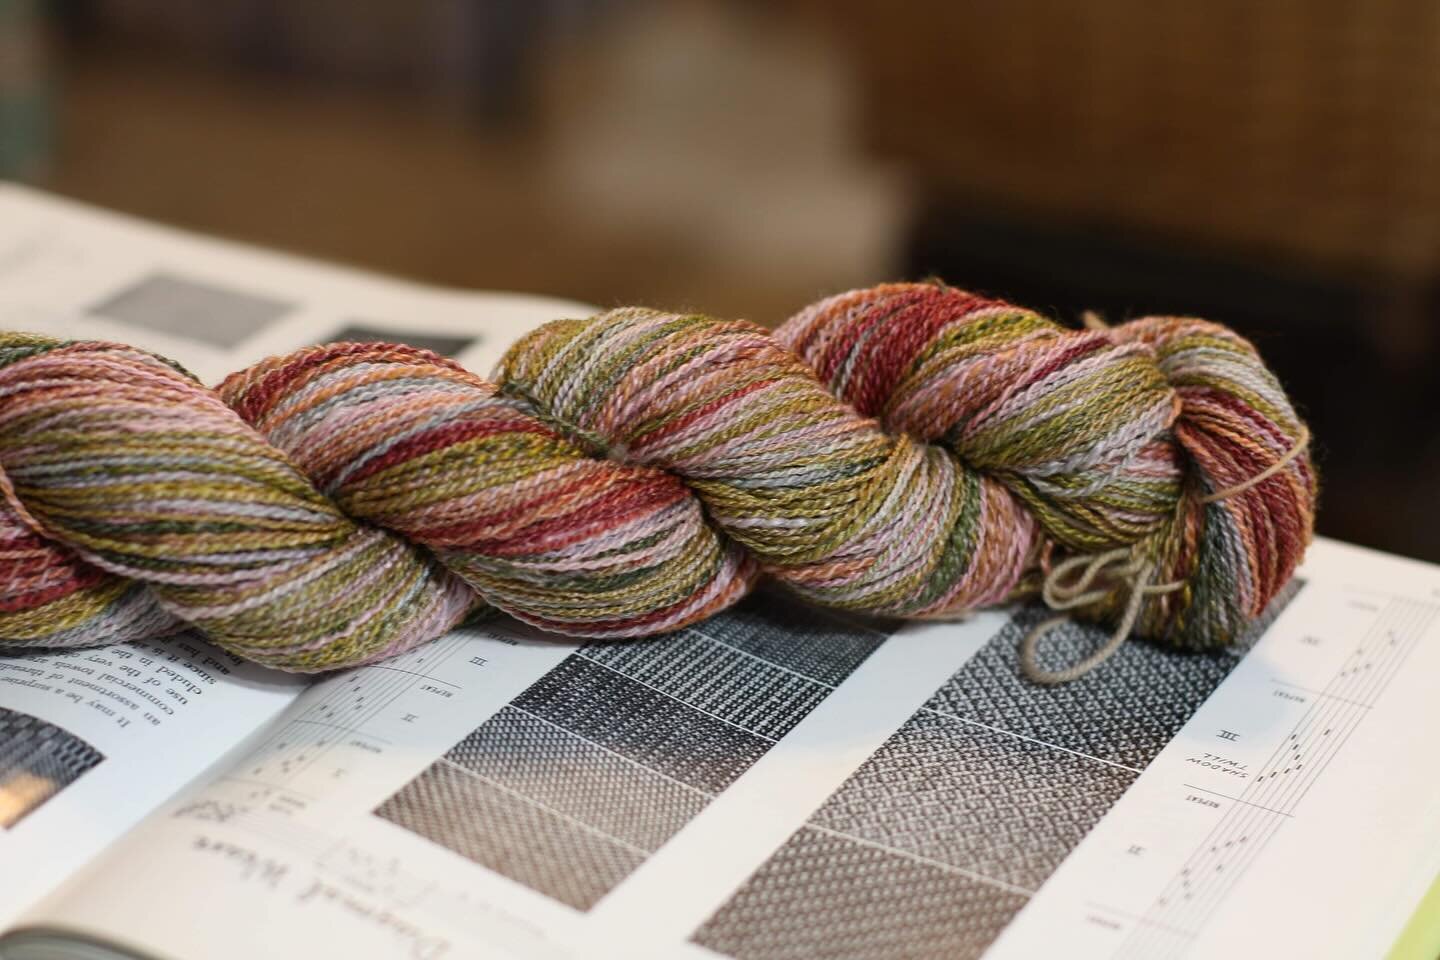 Bordeaux by Inglenook Fibers. 

I taught the girls to knit yesterday and it has me wanting to cast on with handspun! I have plenty of skeins sitting about and waiting for a project- not this one as it found a home at a holiday market last year! - but